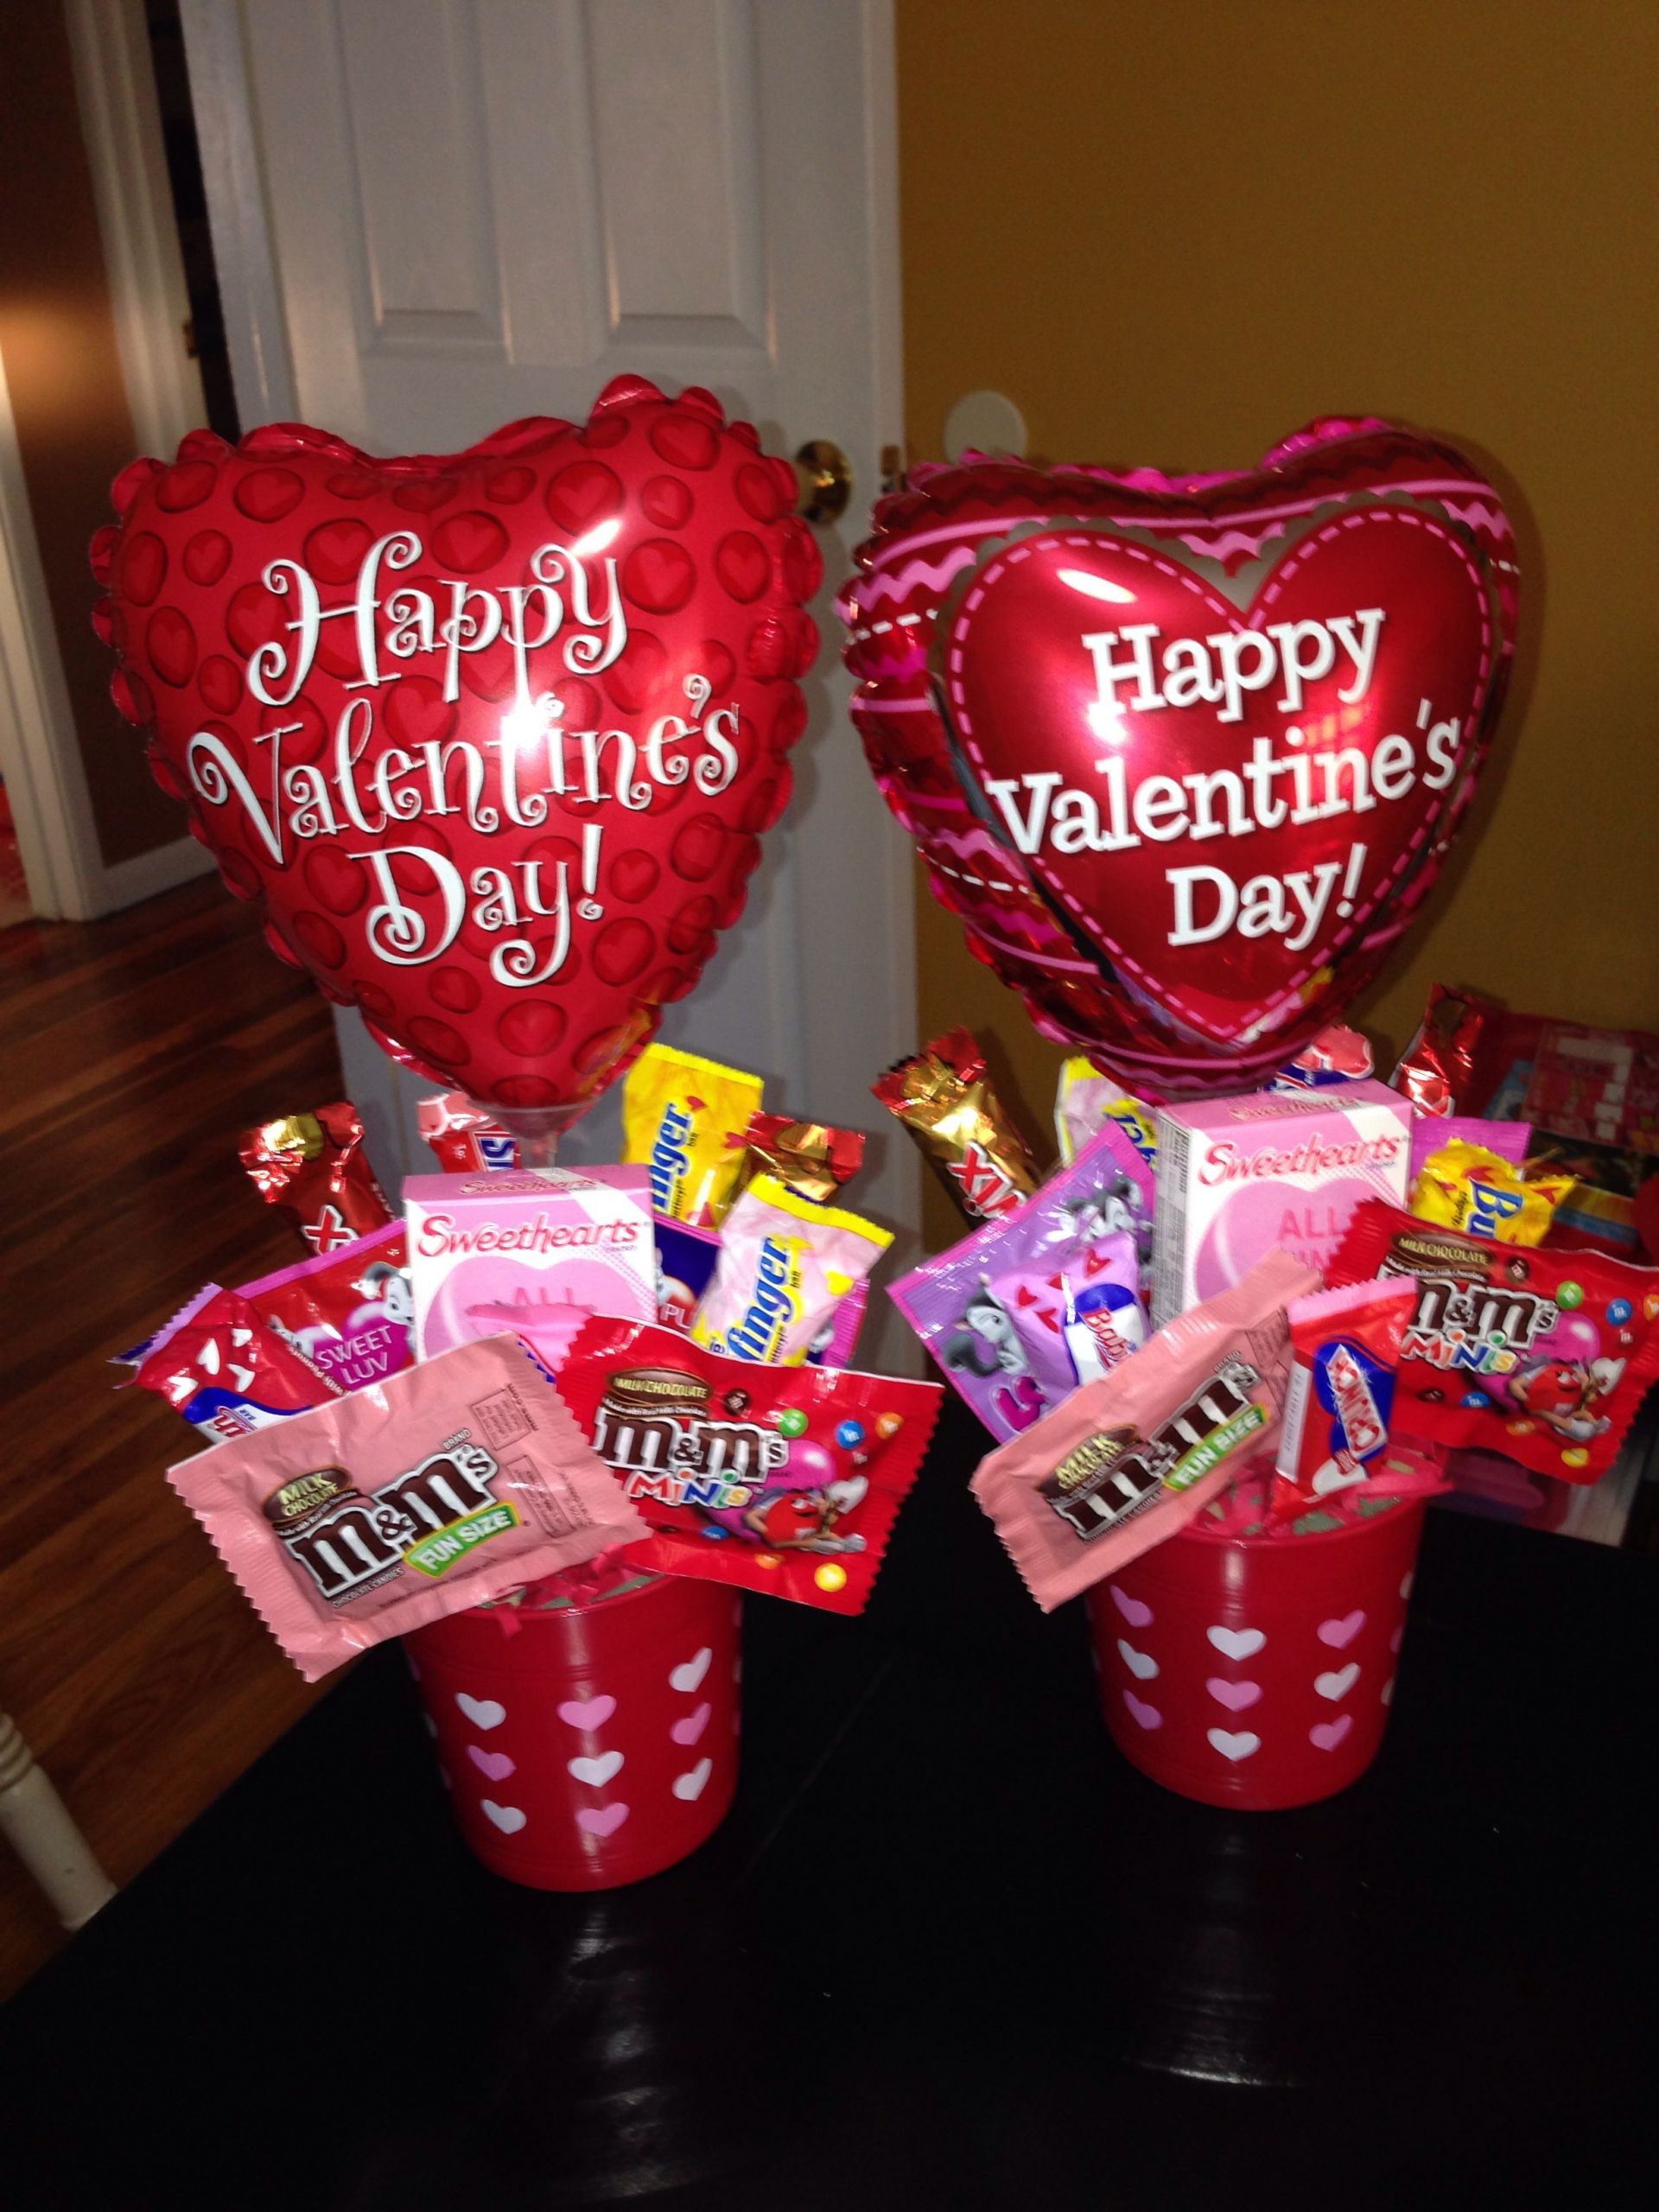 Valentines Day Small Gift Ideas
 Small valentines bouquets